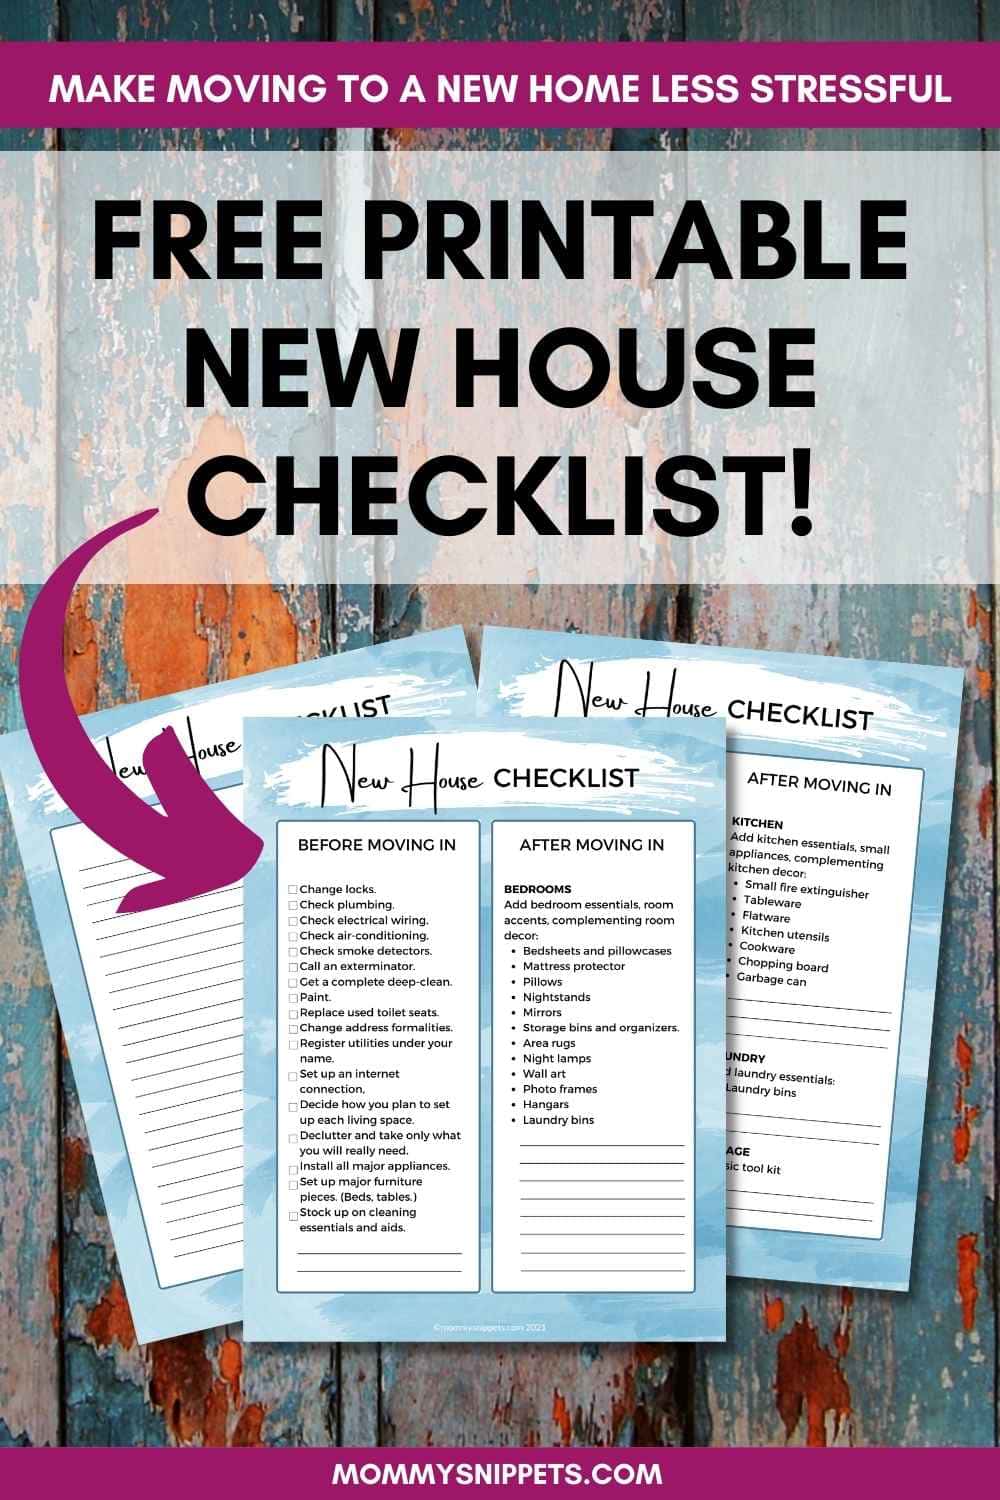 https://mommysnippets.com/wp-content/uploads/2021/10/This-New-House-Checklist-Helps-Moving-to-Your-New-Home-Less-Stressful.jpg